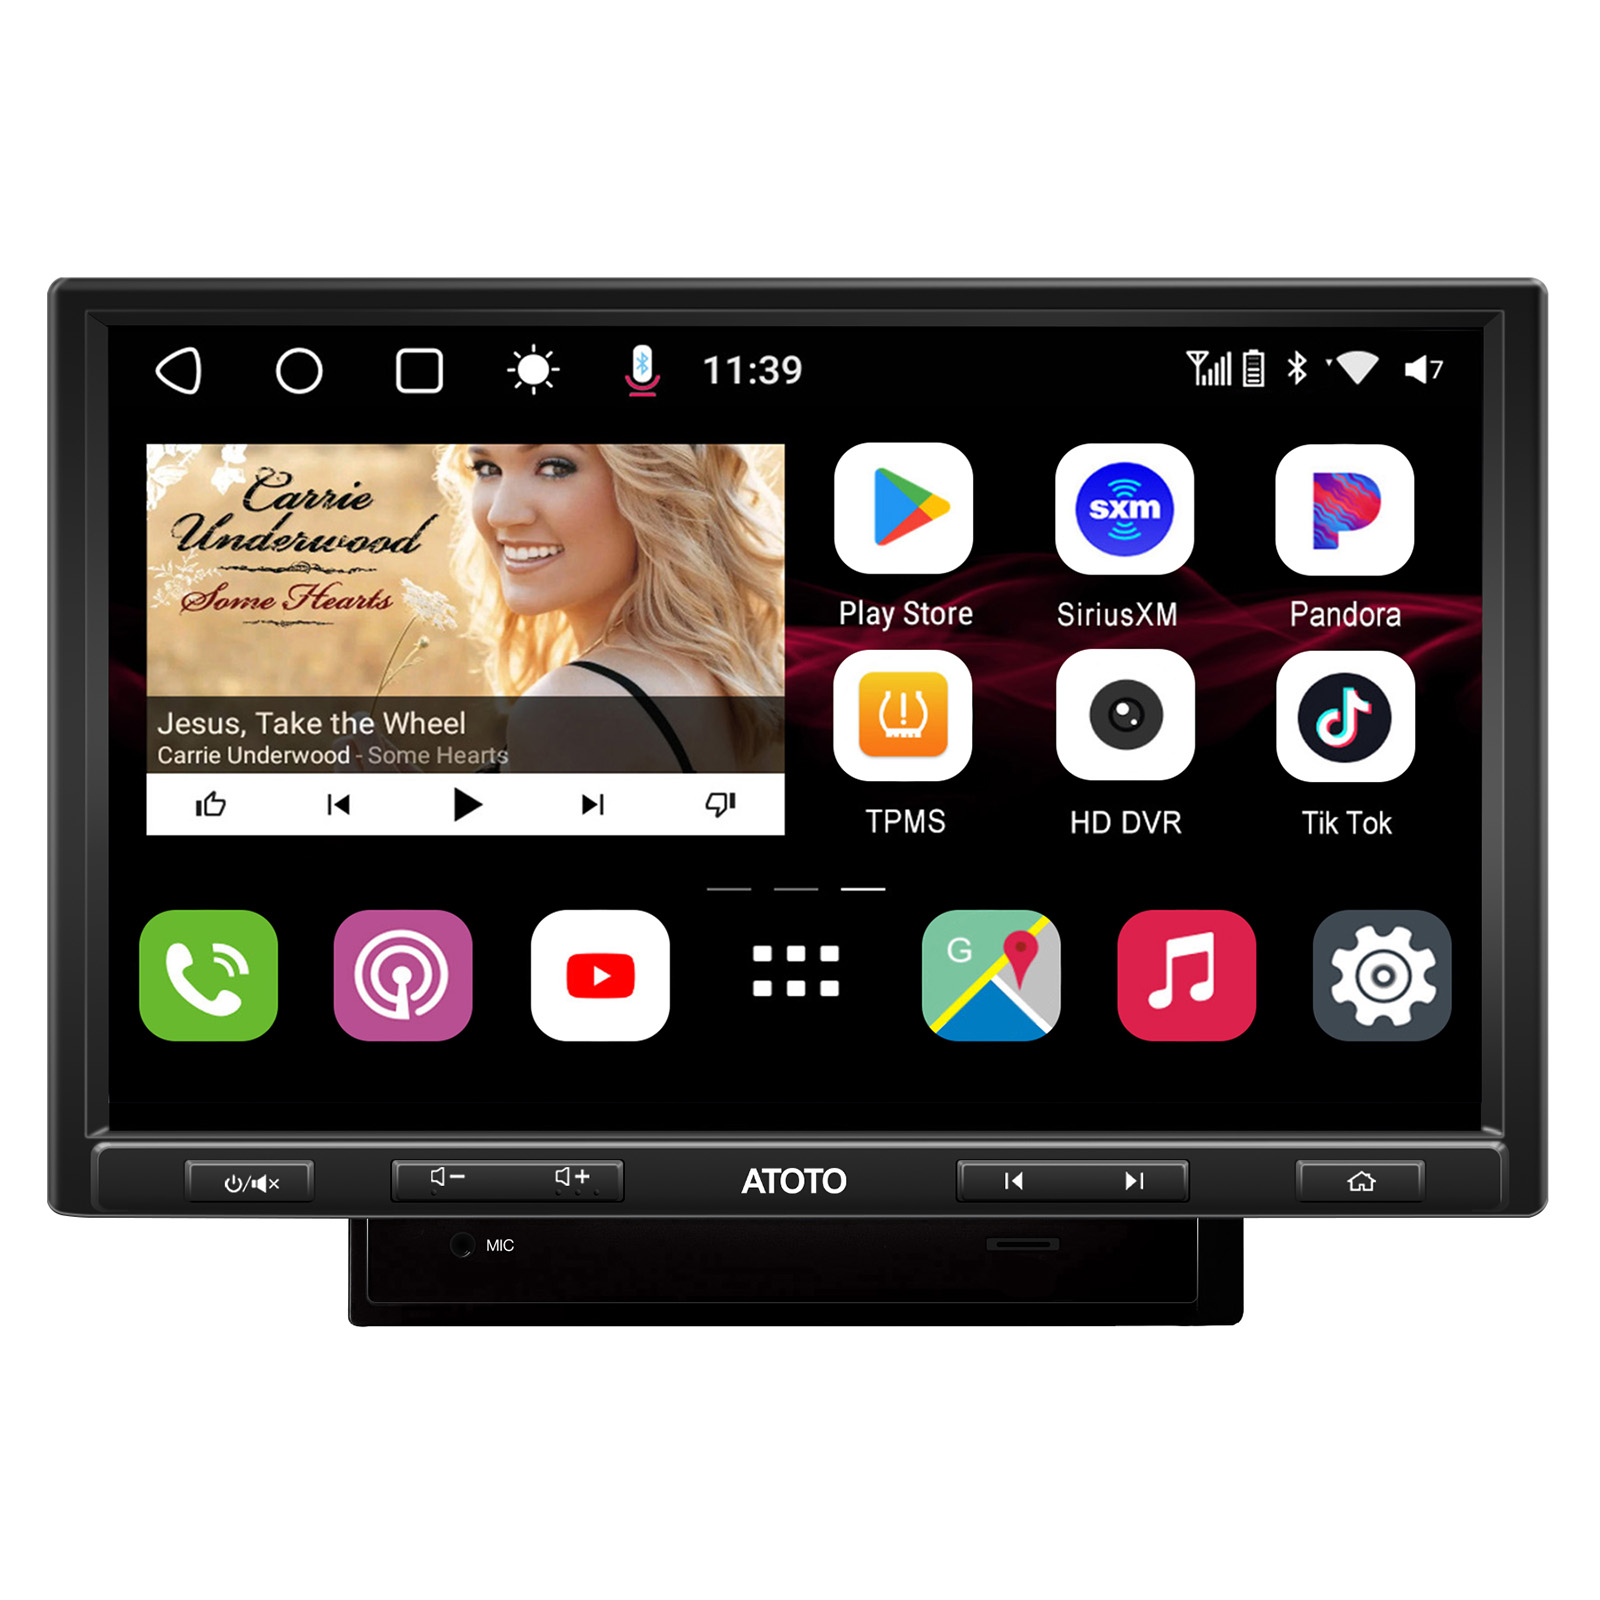 ATOTO S8 Standard Double Din Car Stereo,7inch IPS Touch Screen 3G+32G  Android in-Dash Navigation,Wireless Carplay& Wireless Android Auto with GPS  Tracking,HD LRV 